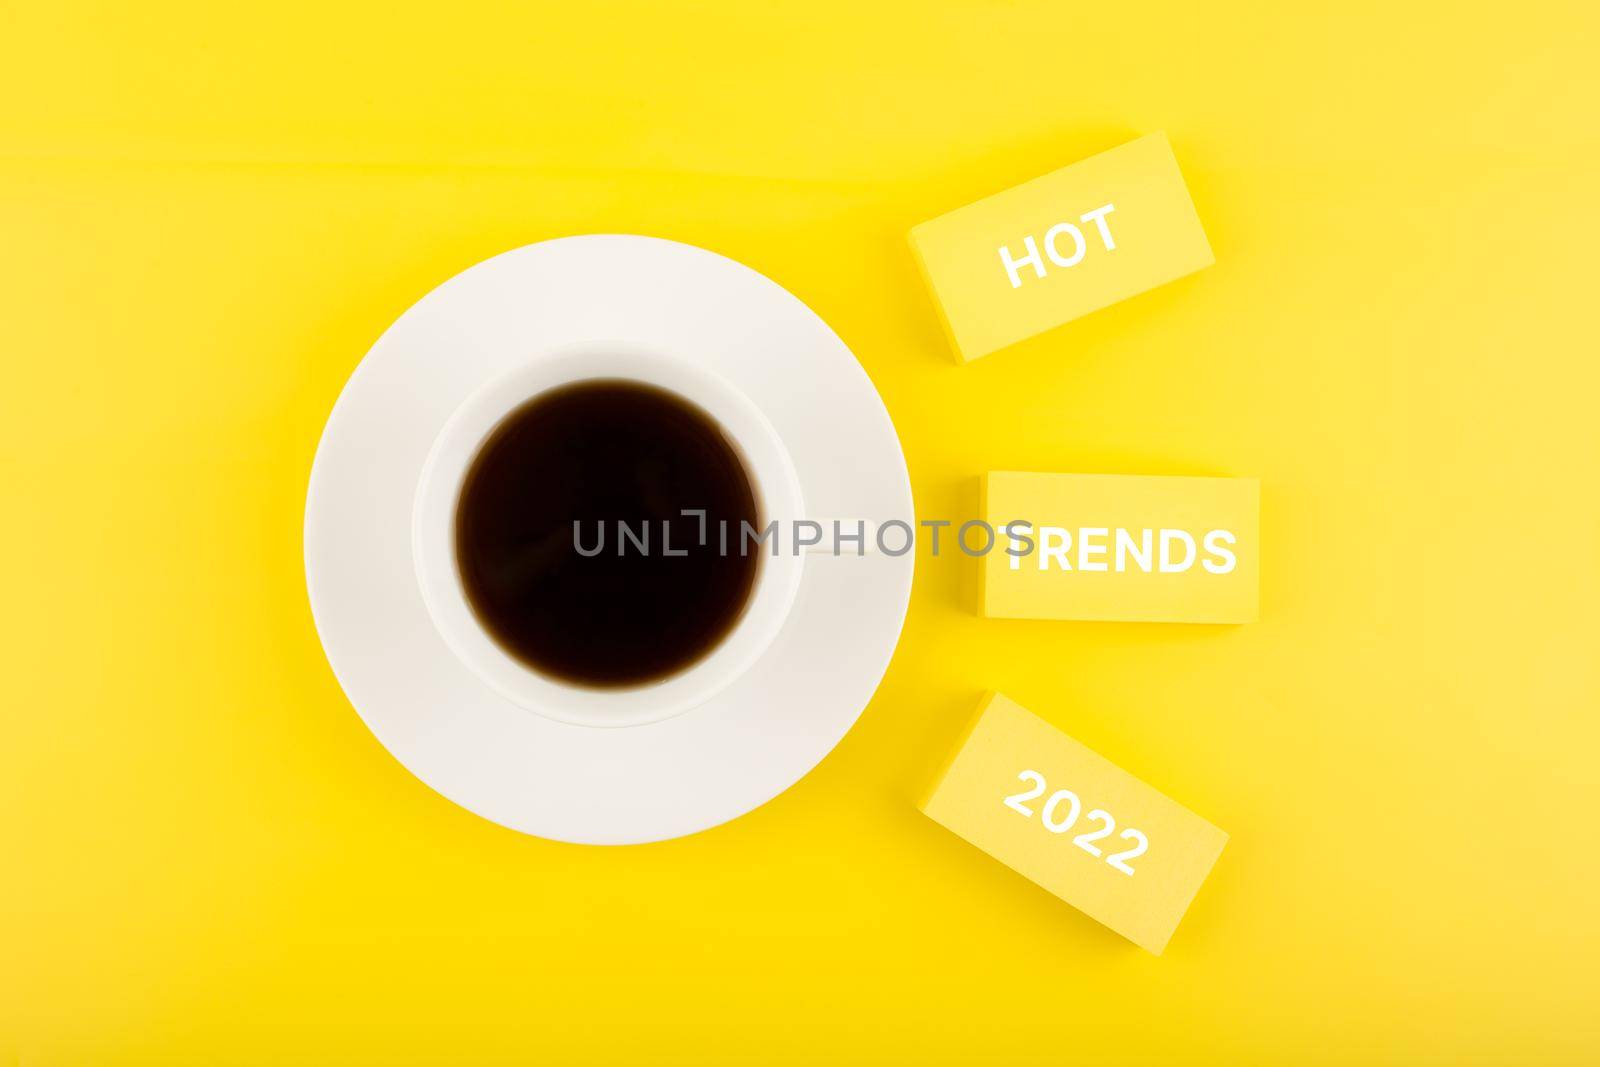 Hot trends 2022 written on rectangles next to cup of coffee on bright yellow background by Senorina_Irina